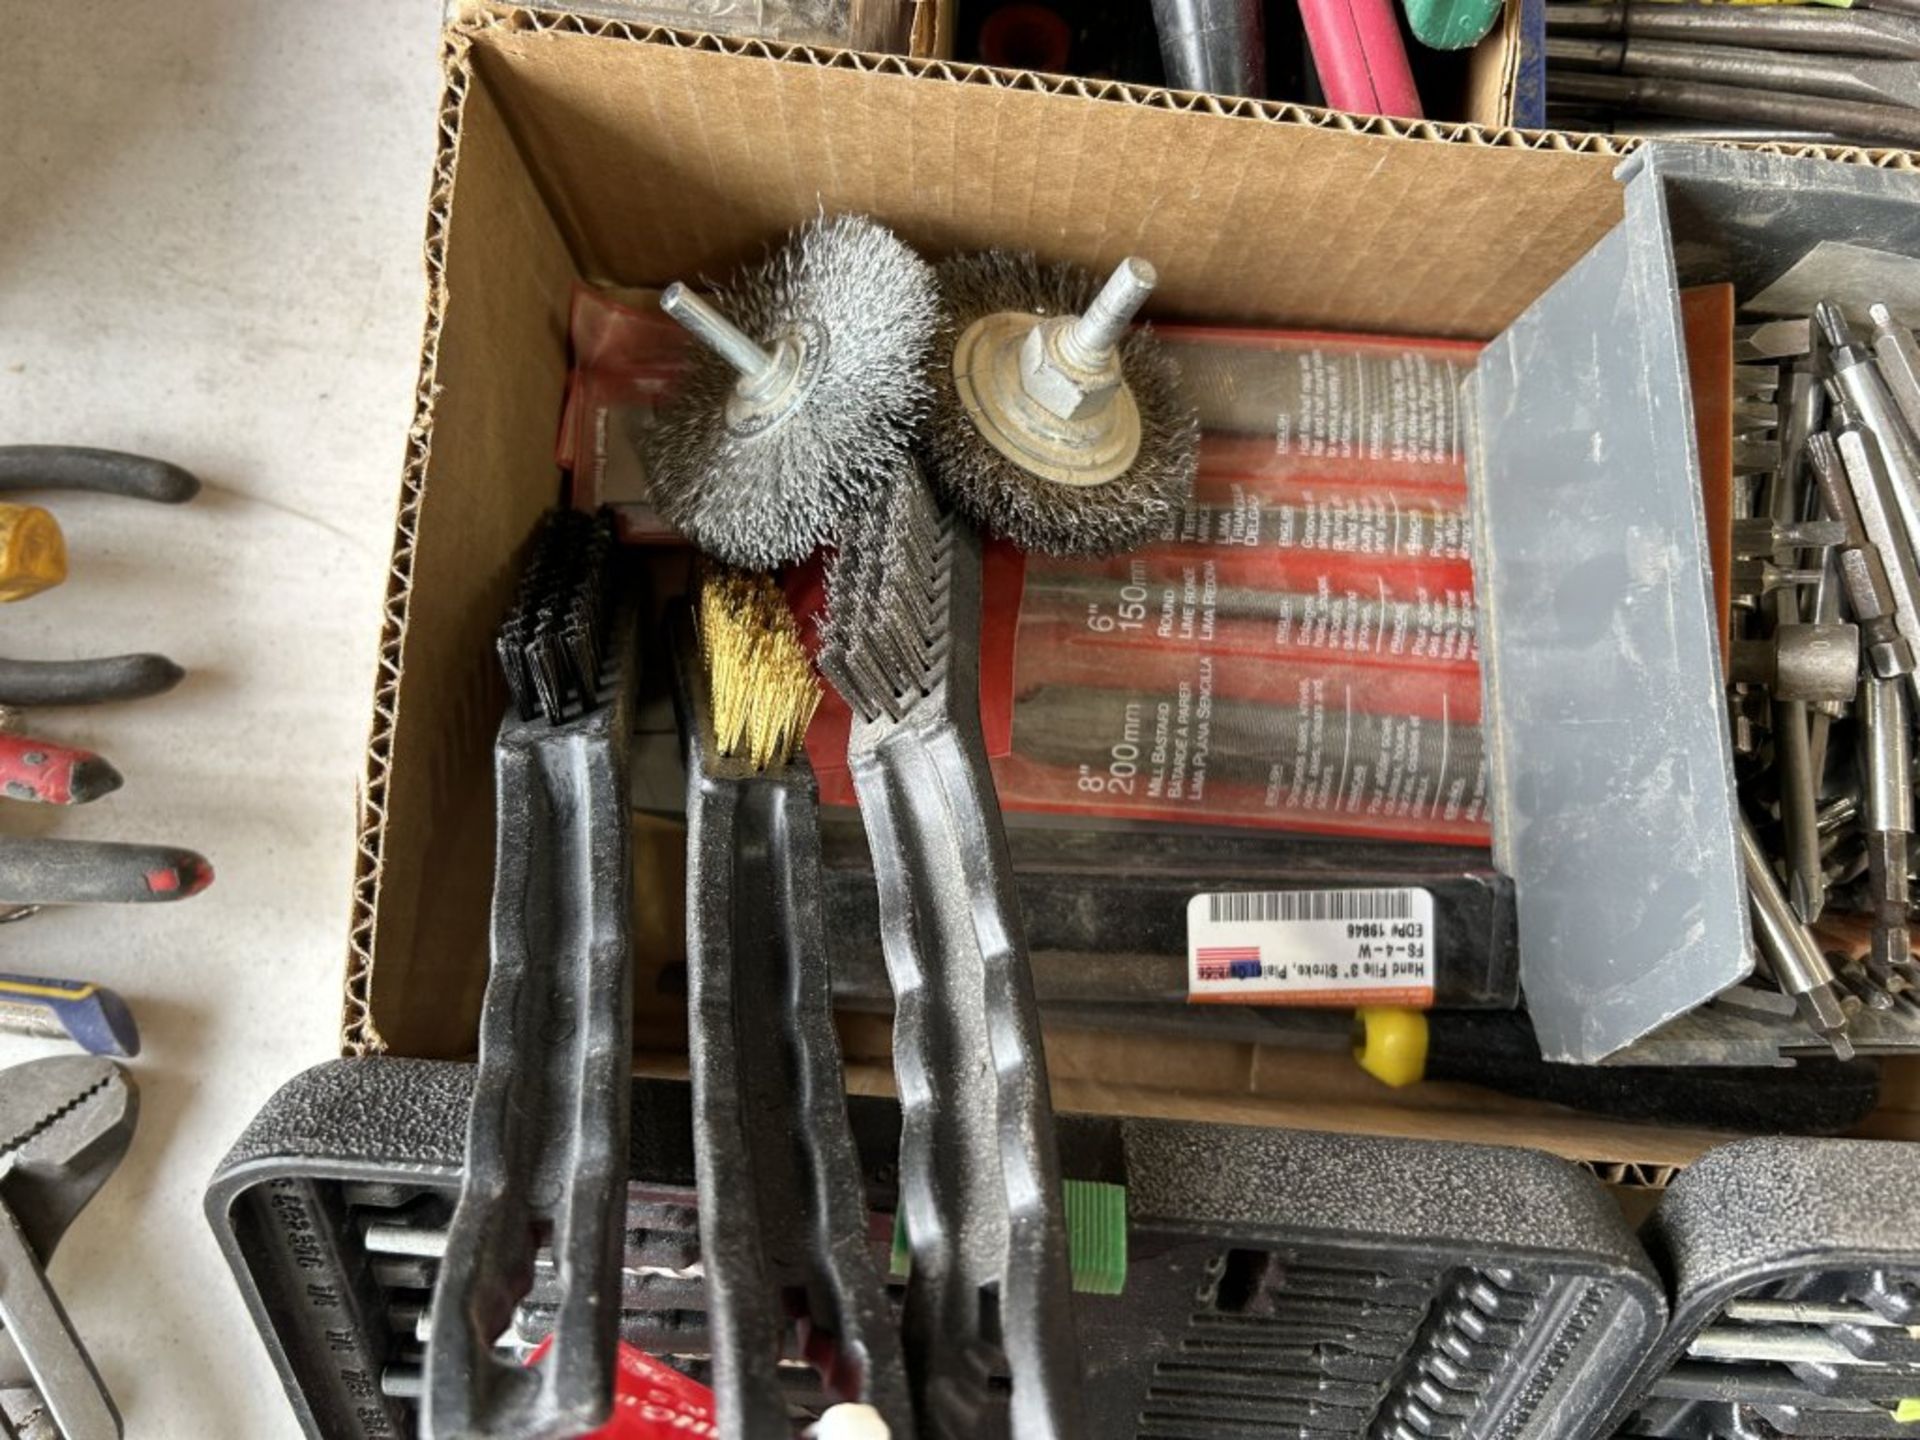 ASSORTED HAND TOOLS AND DRILL BITS, SCRAPERS, FILES, ETC. - Image 5 of 7